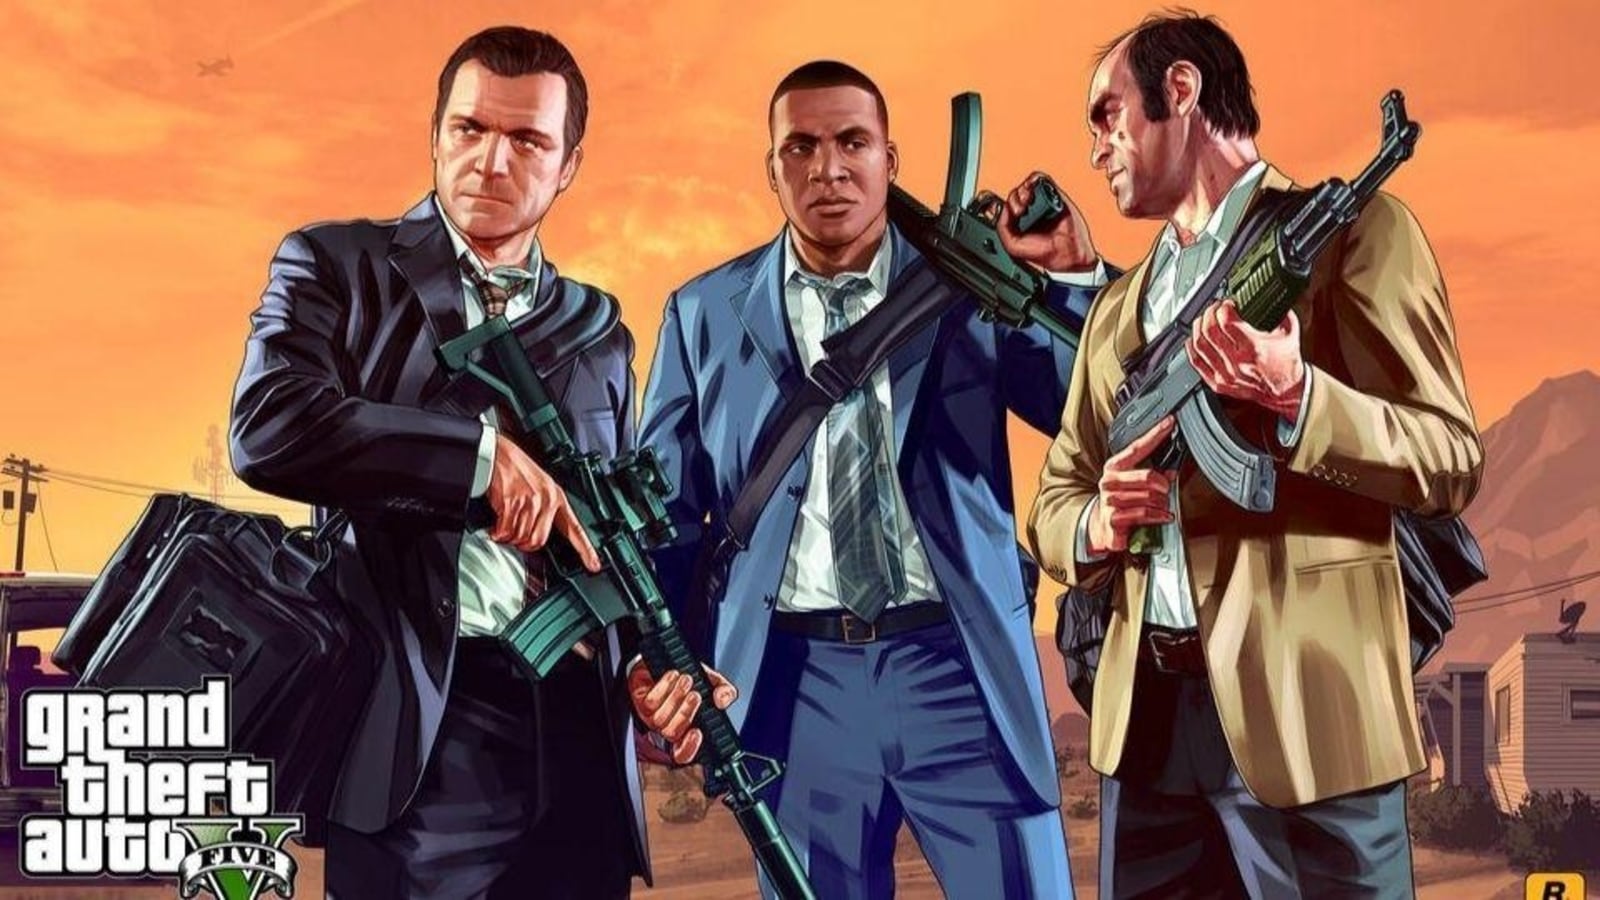 Best GTA V cheat codes for PC, PS5, and Xbox; Check the list